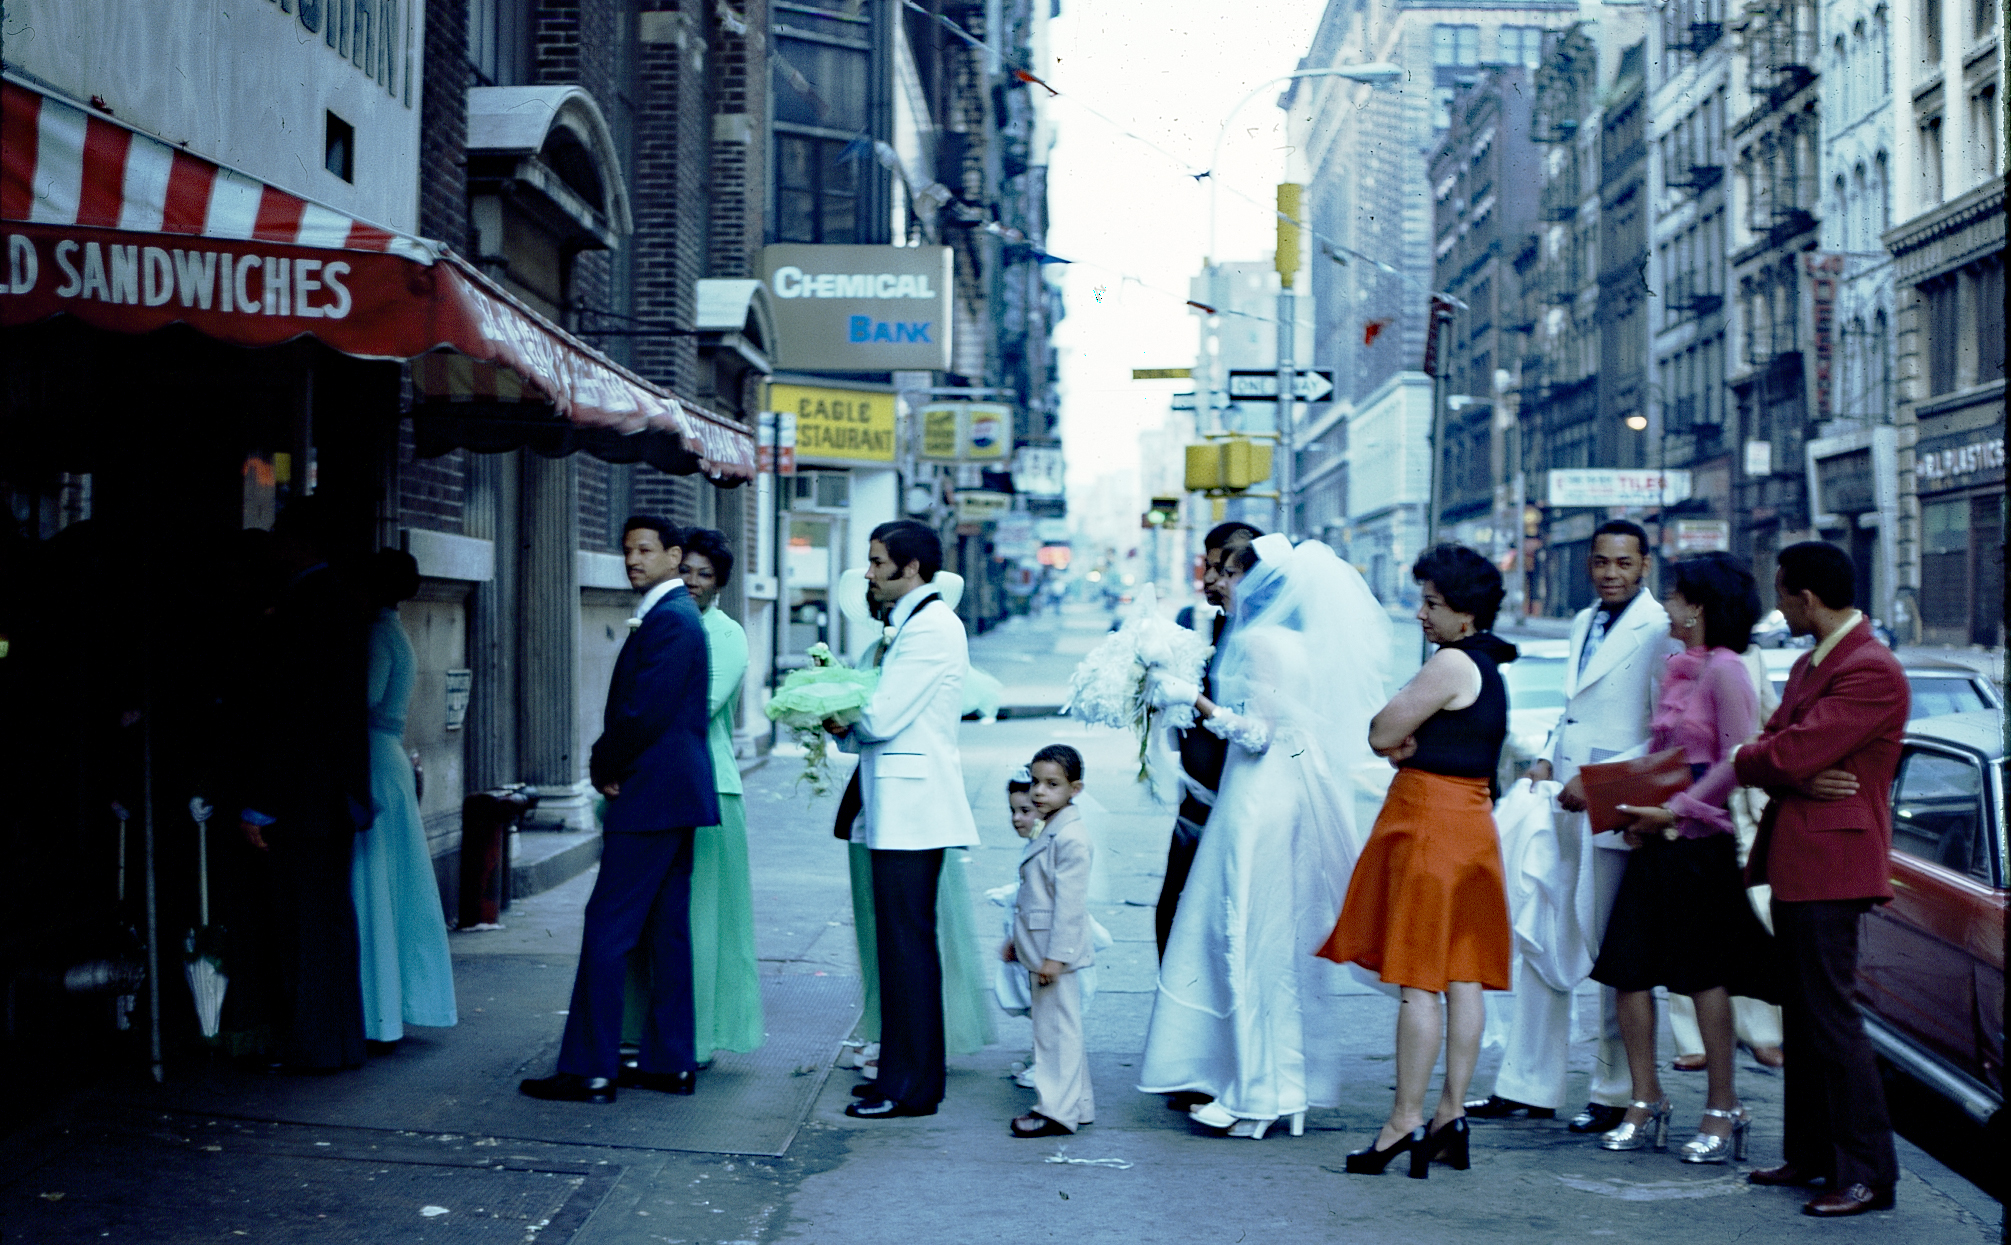 Wedding party entering a restaurant on Broadway near Spring, 1975